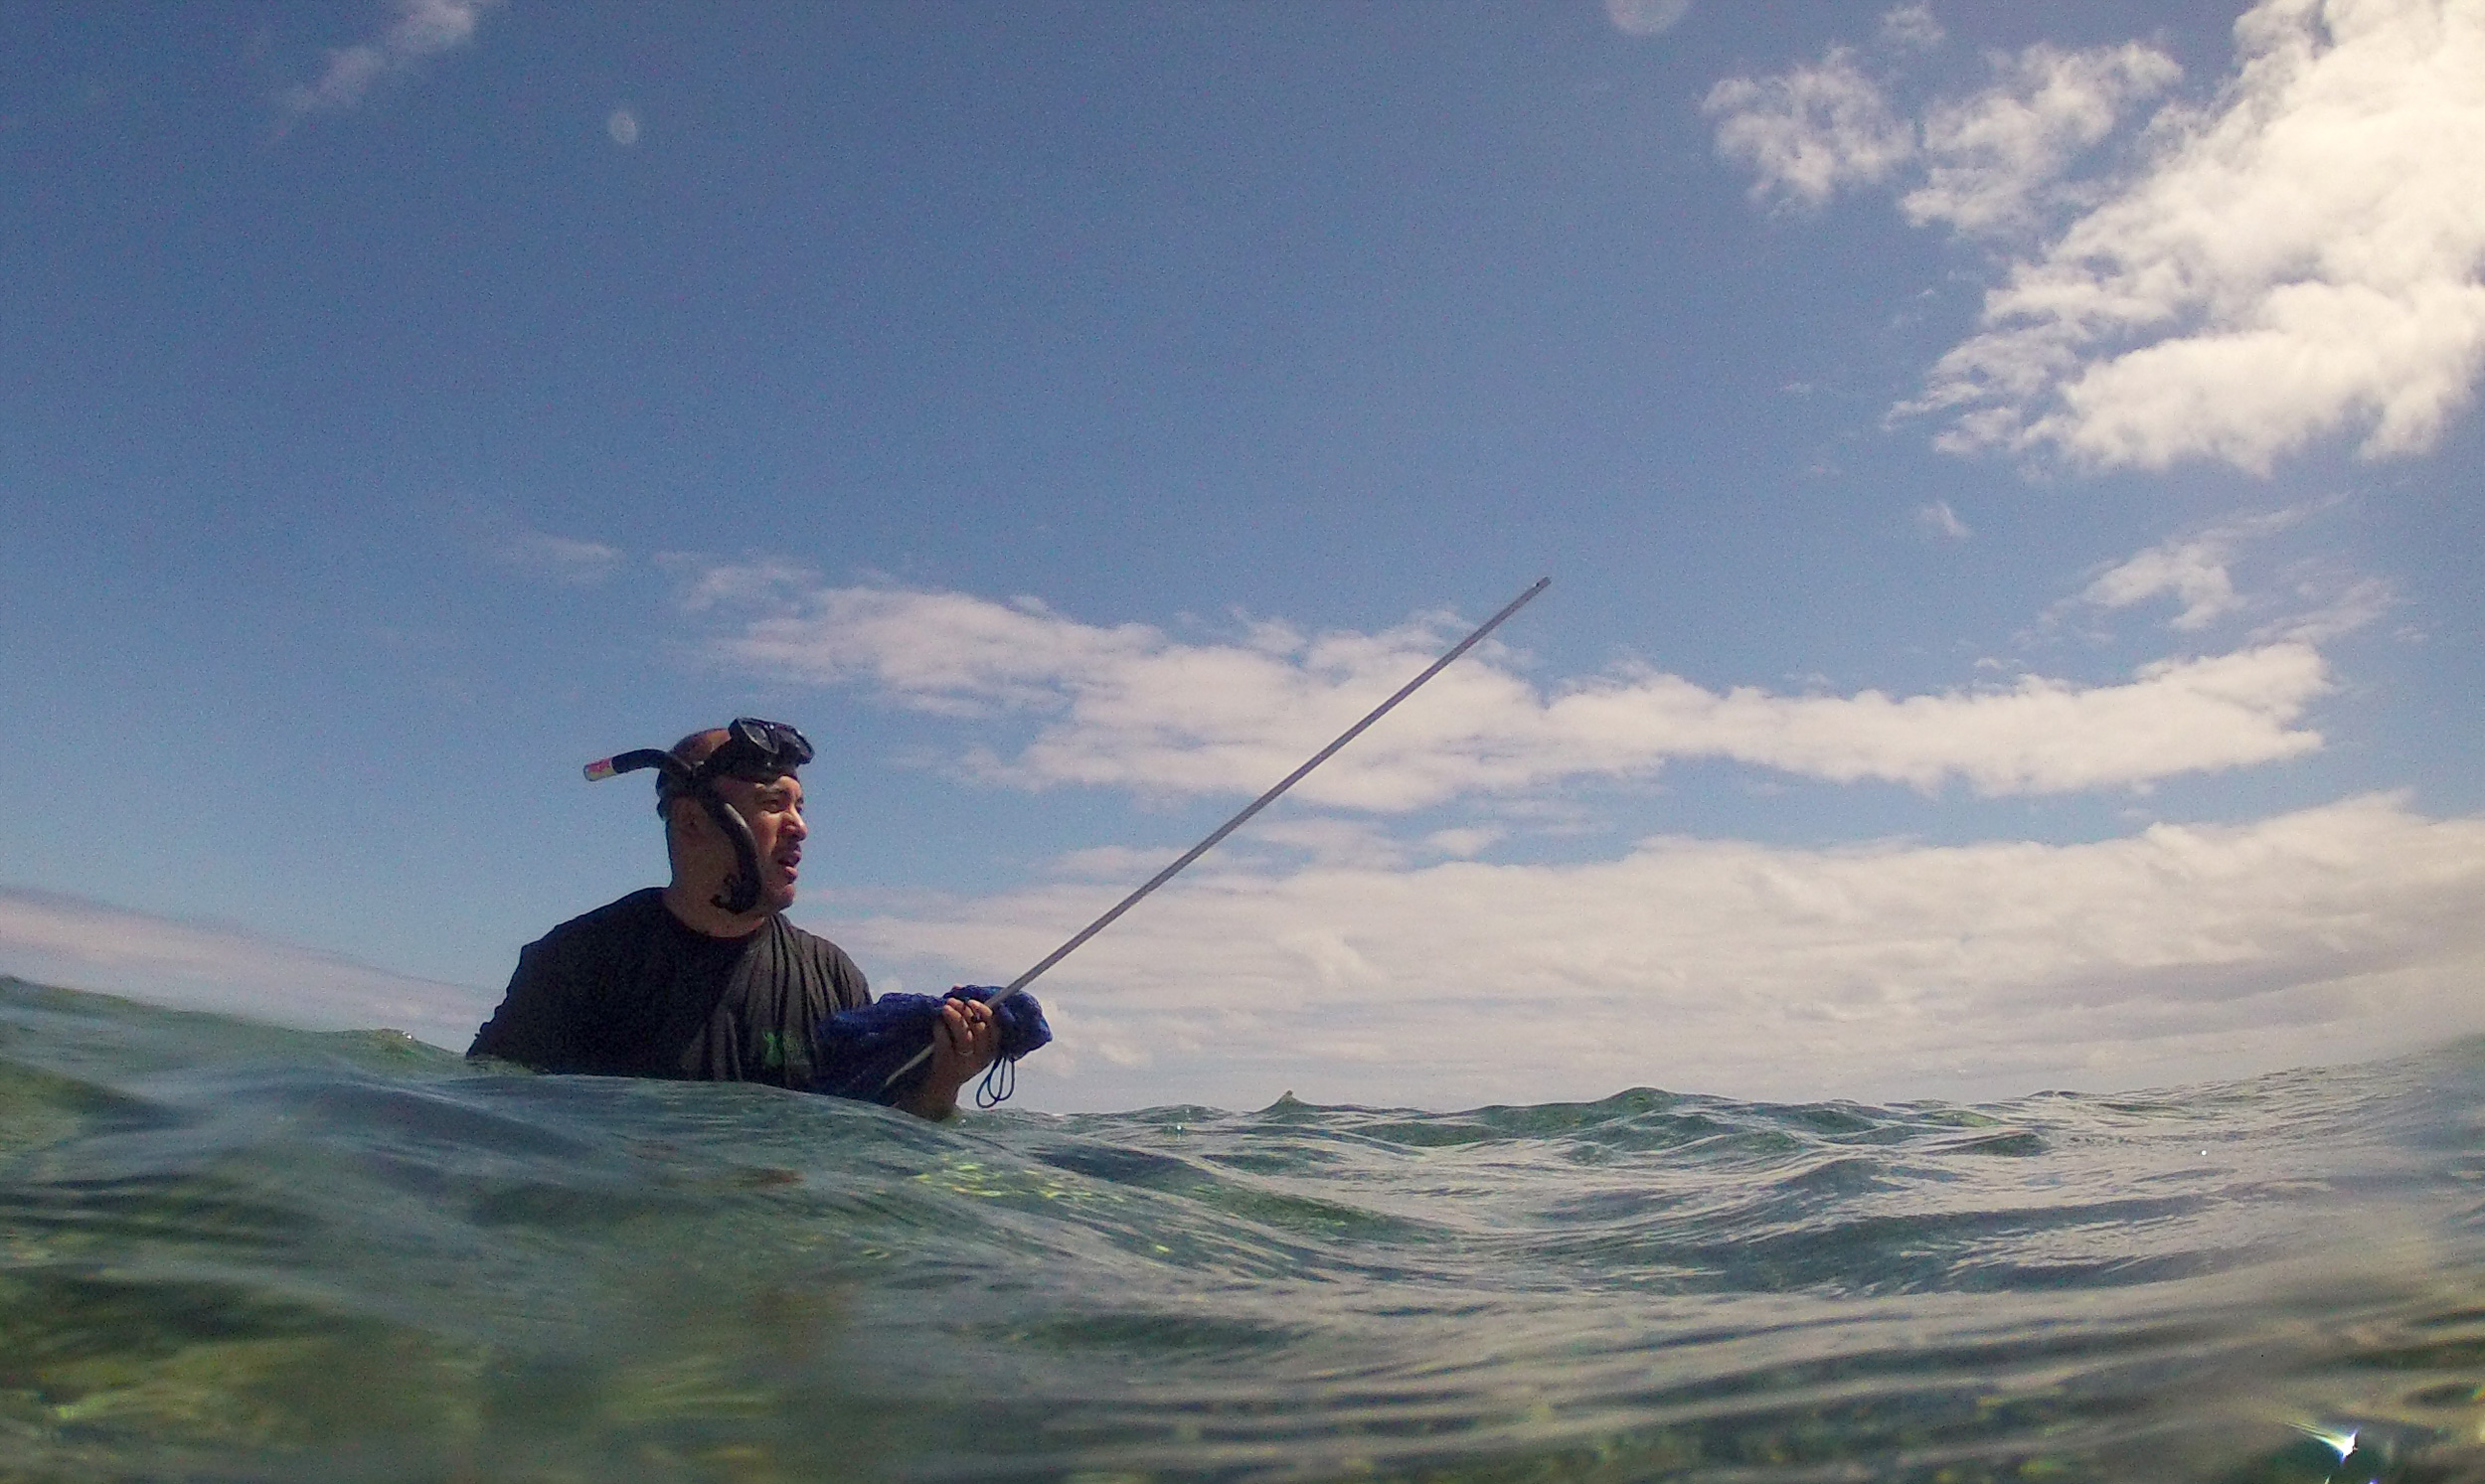 Early Mornings on the Coast: Spearfishing in Hawaii - Harvesting